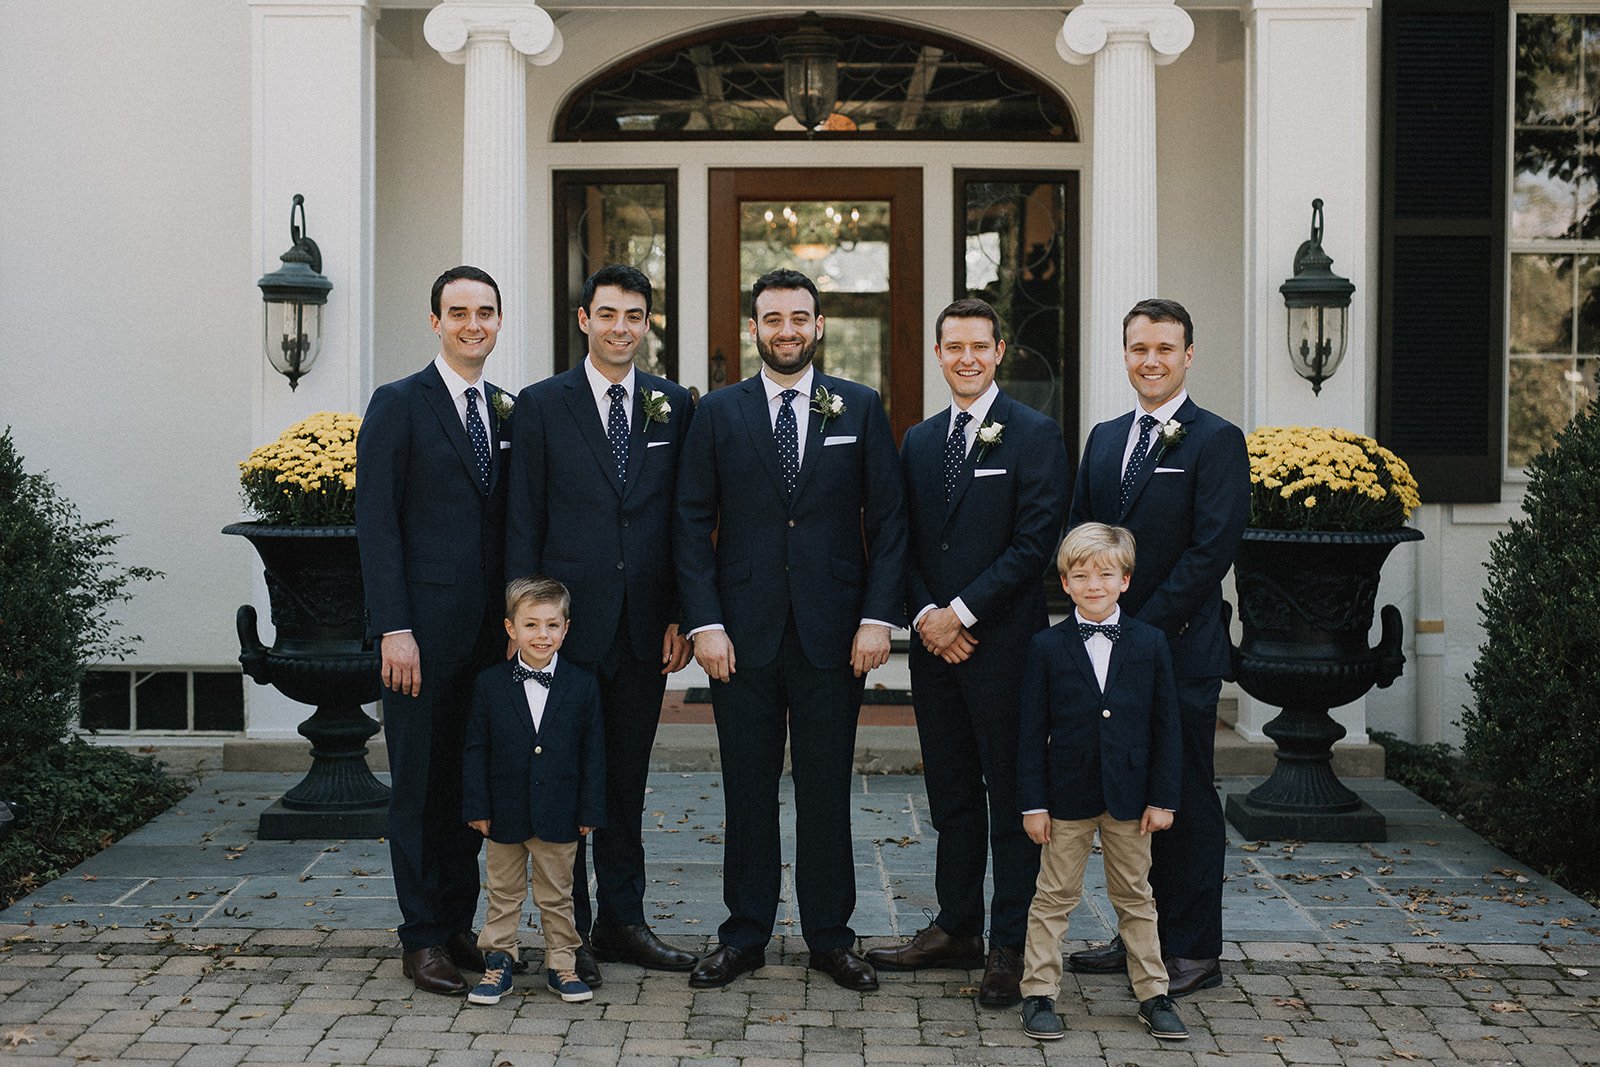 Groomsmen portrait with ring bearers at Indian Hill wedding